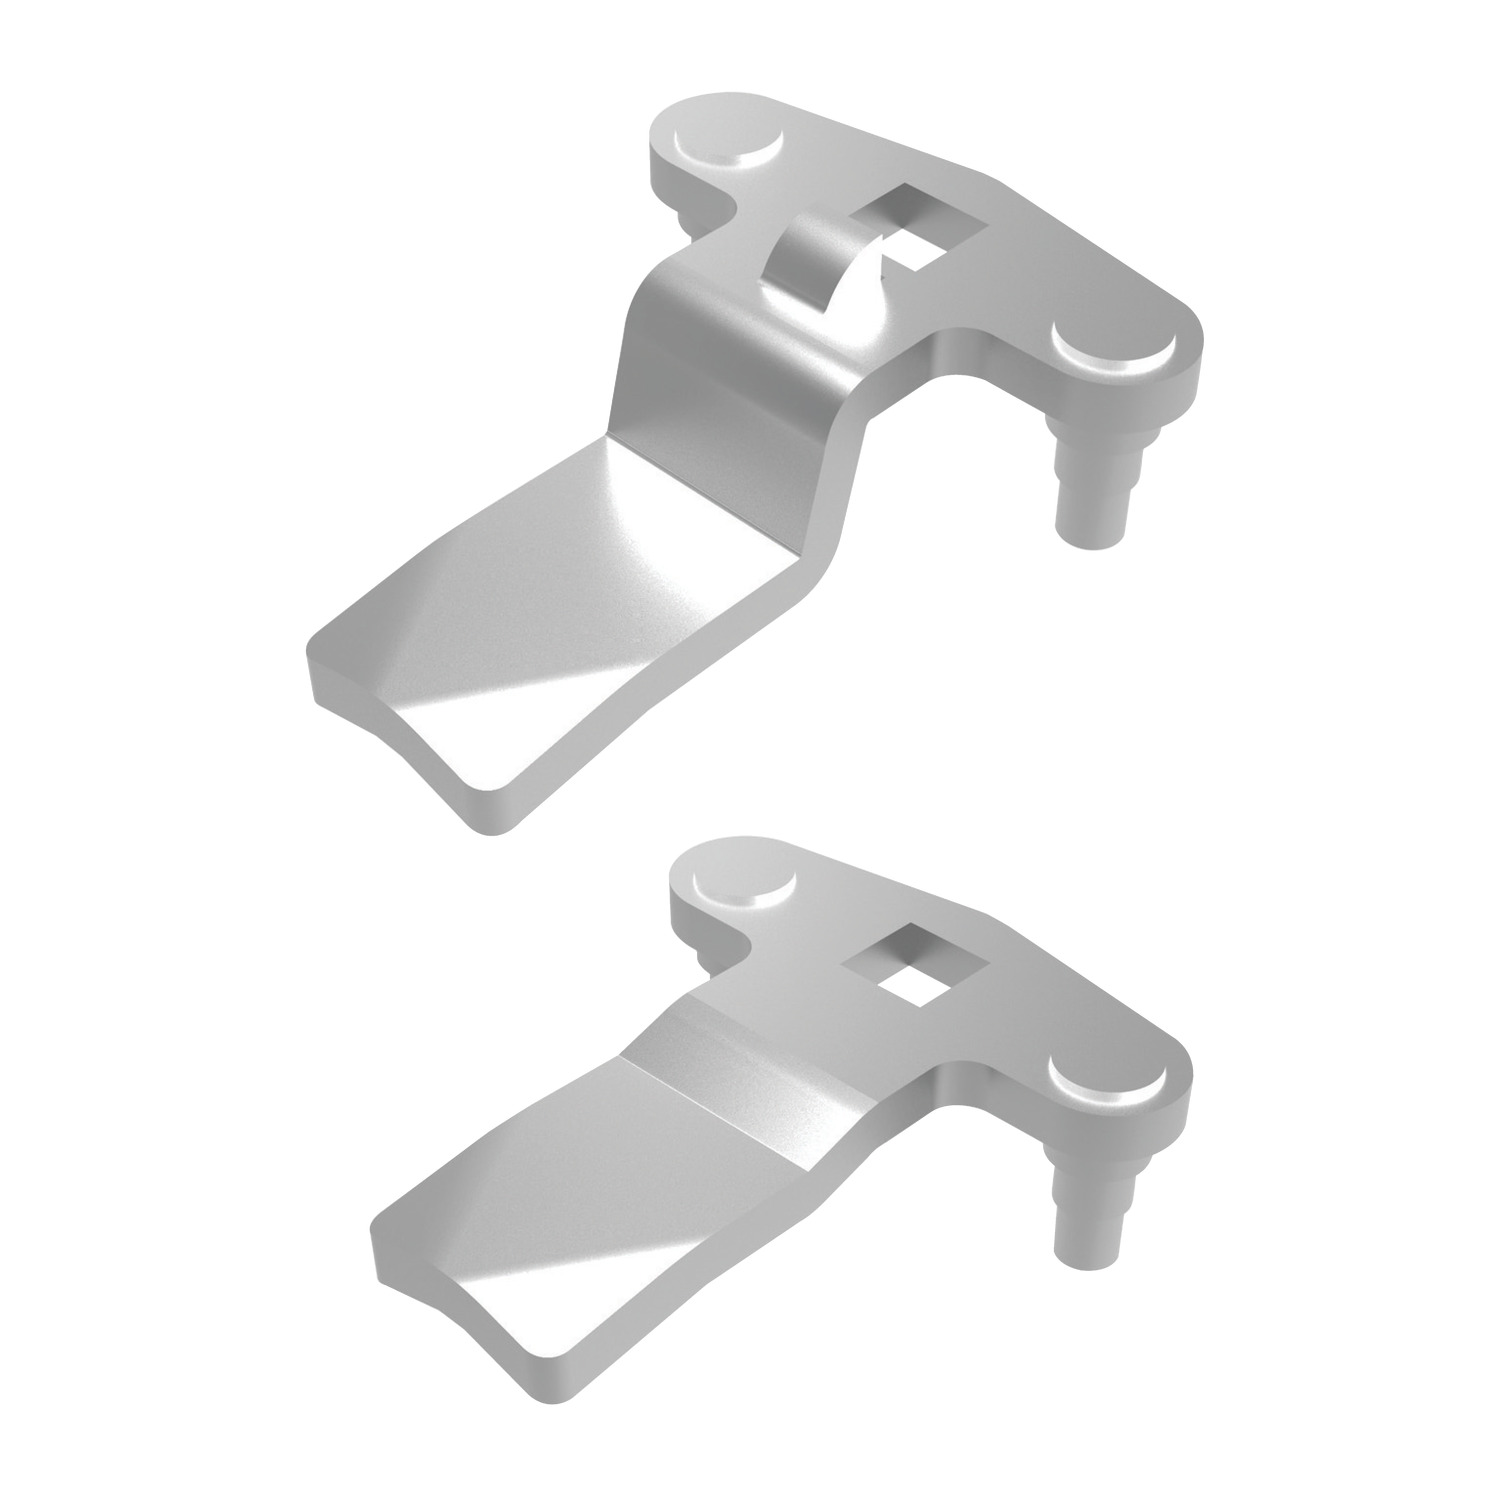 A0240.AW0000 Two Point Cams Flexi for 3-point latching - Steel, zinc plated - With Projection